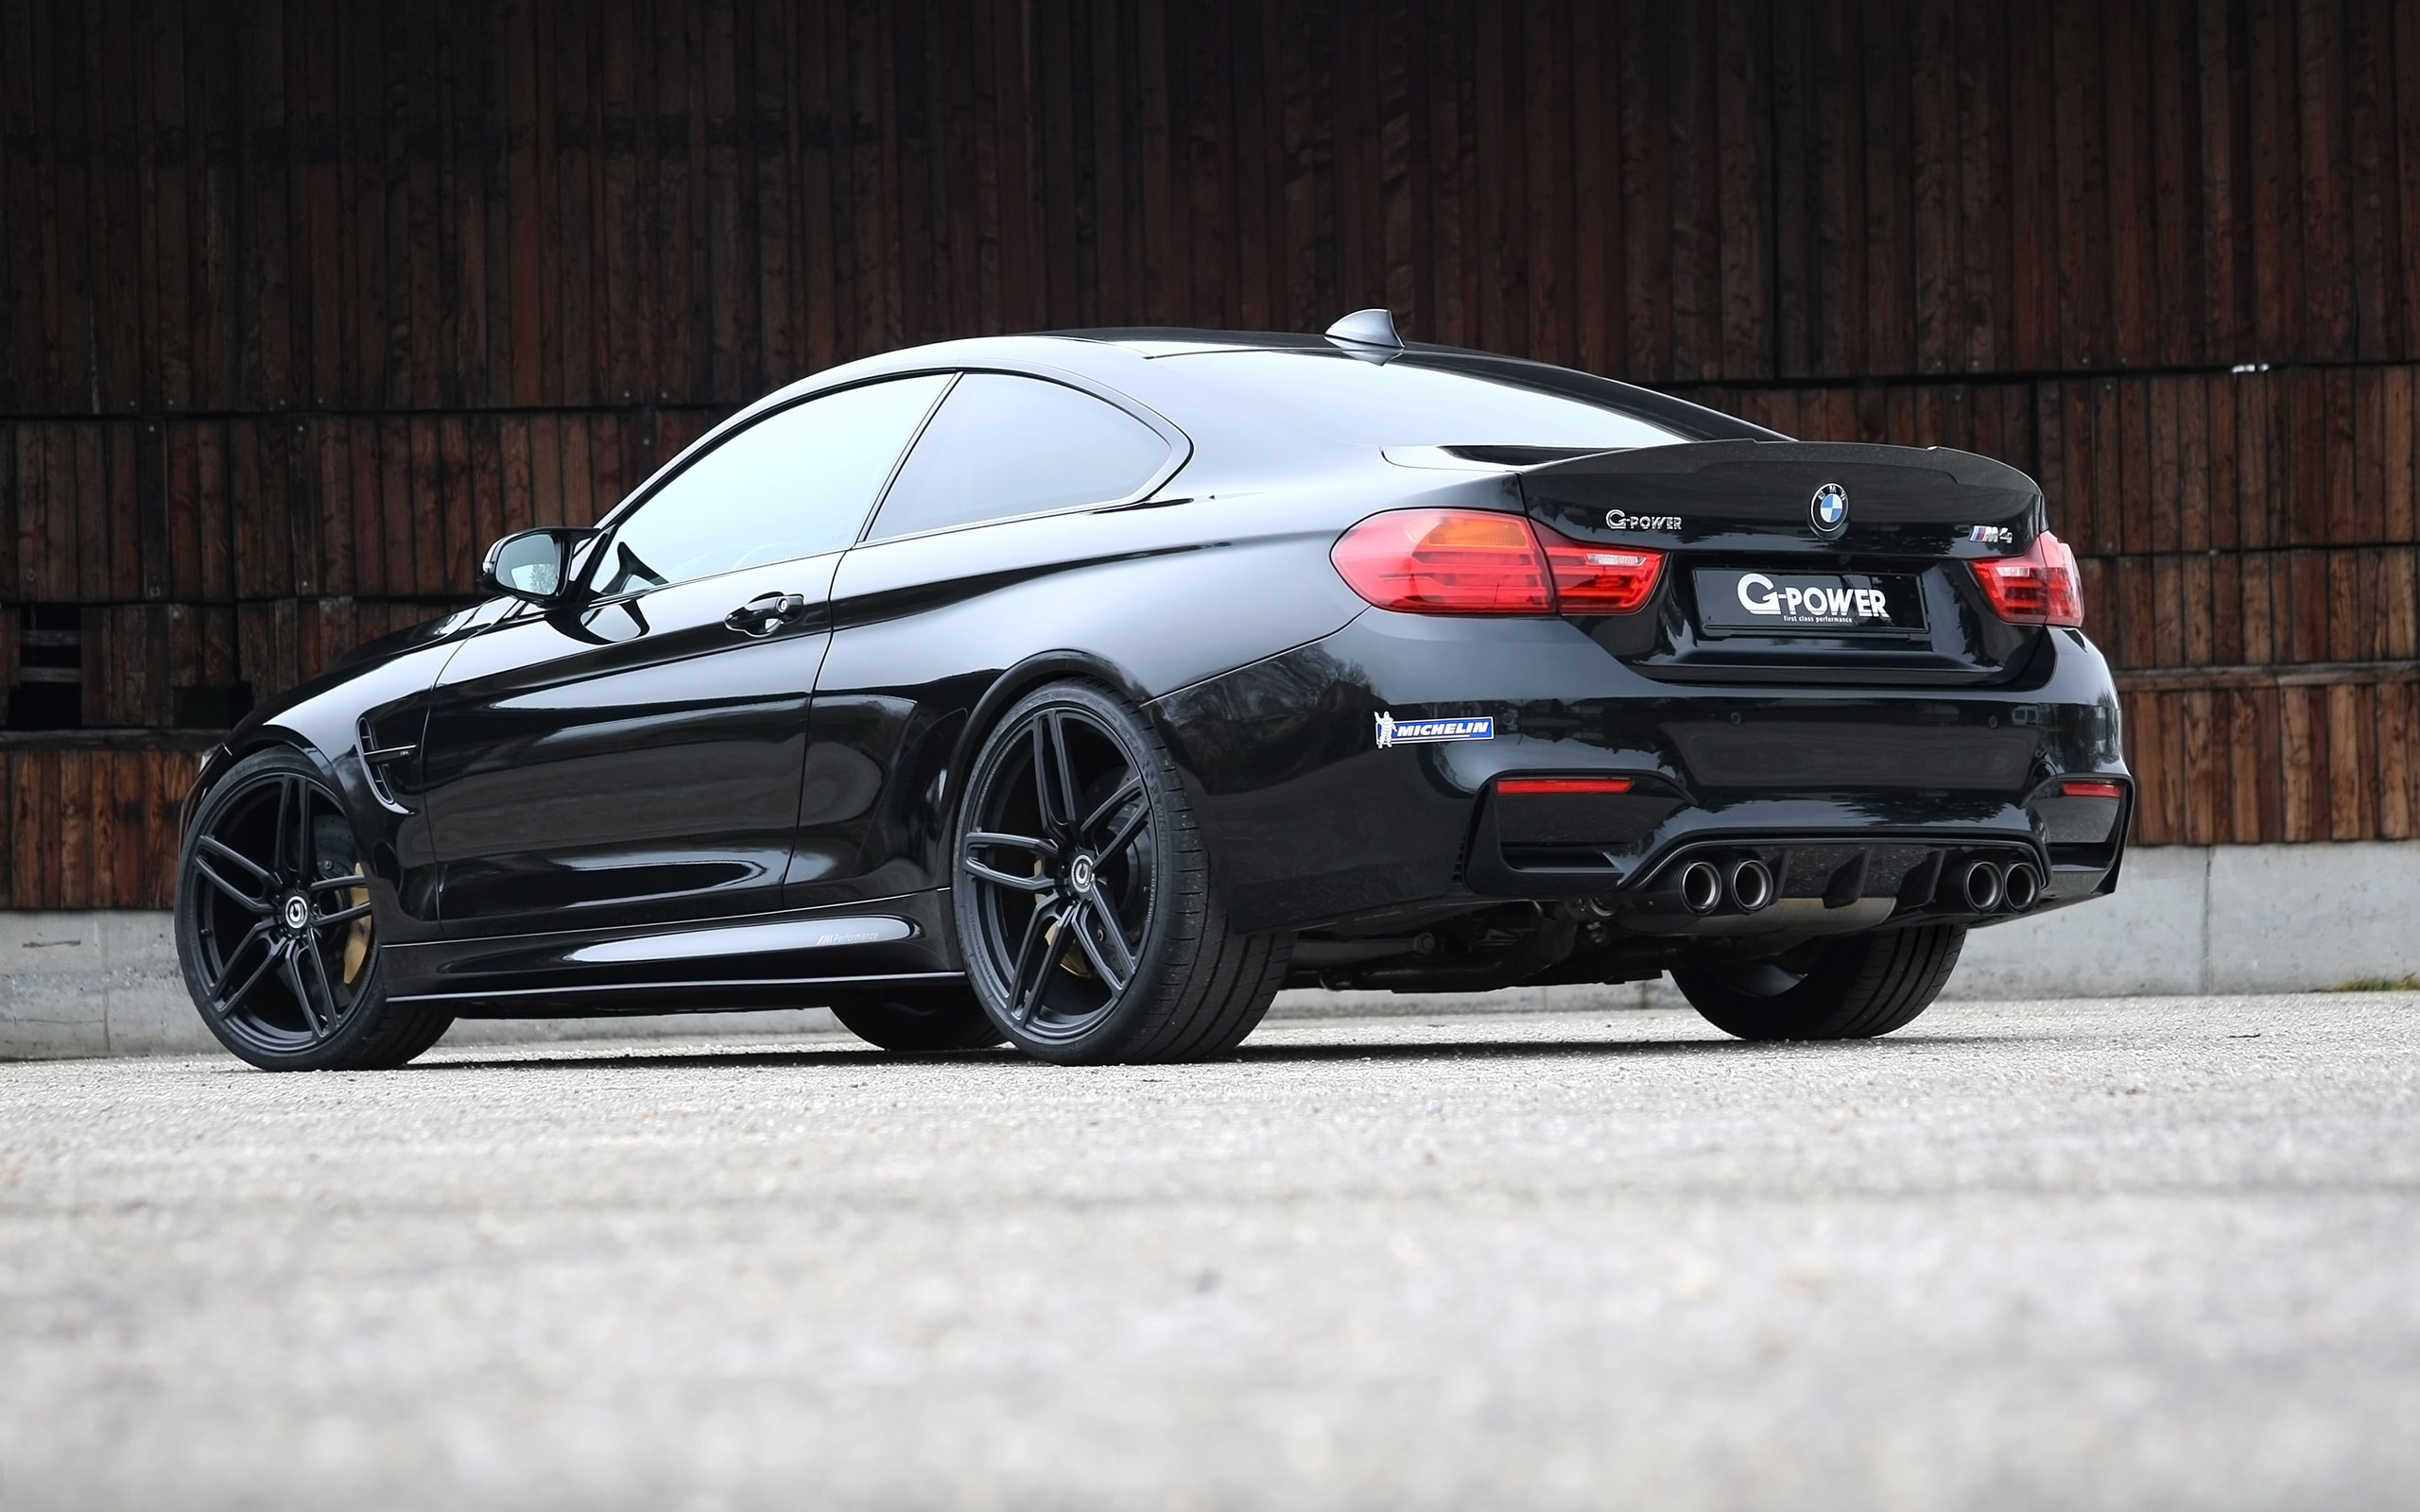 Black BMW M4 G-Power 2014 Rear for 2560 x 1600 widescreen resolution